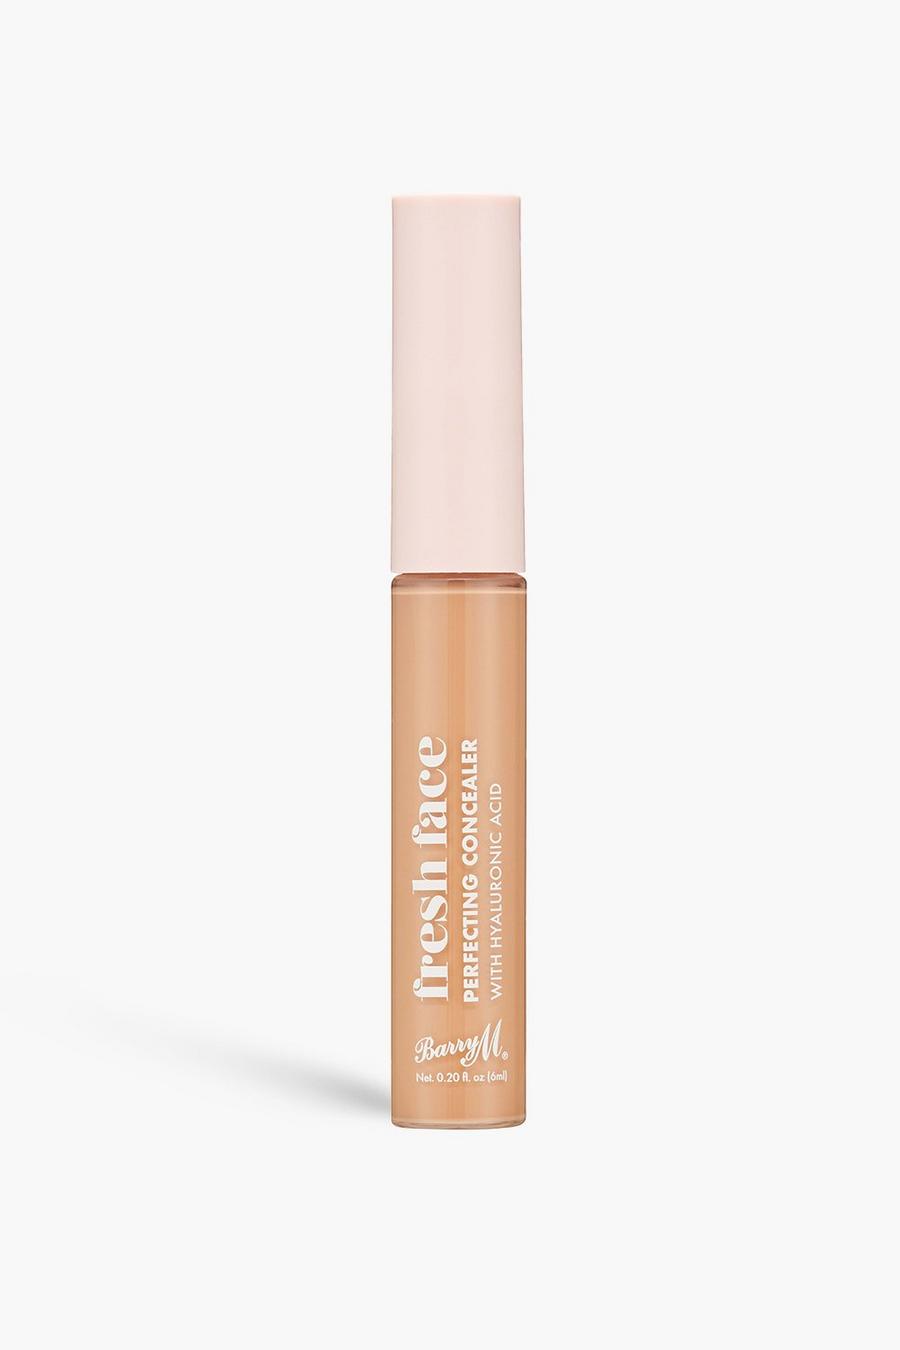 Tan brun Barry M Fresh Face Perfecting Concealer 5